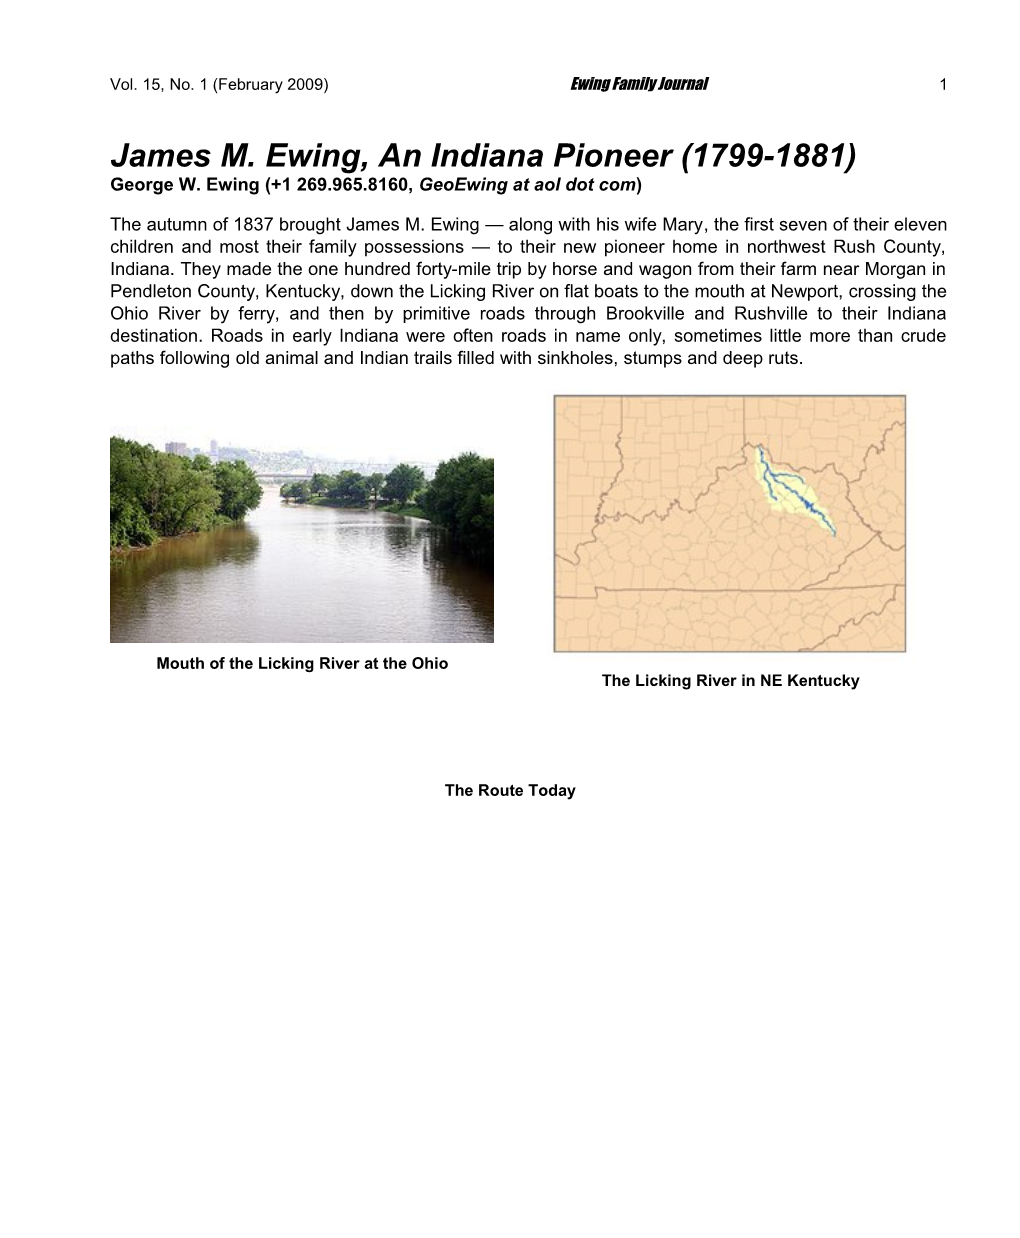 James M. Ewing, an Indiana Pioneer (1799-1881)